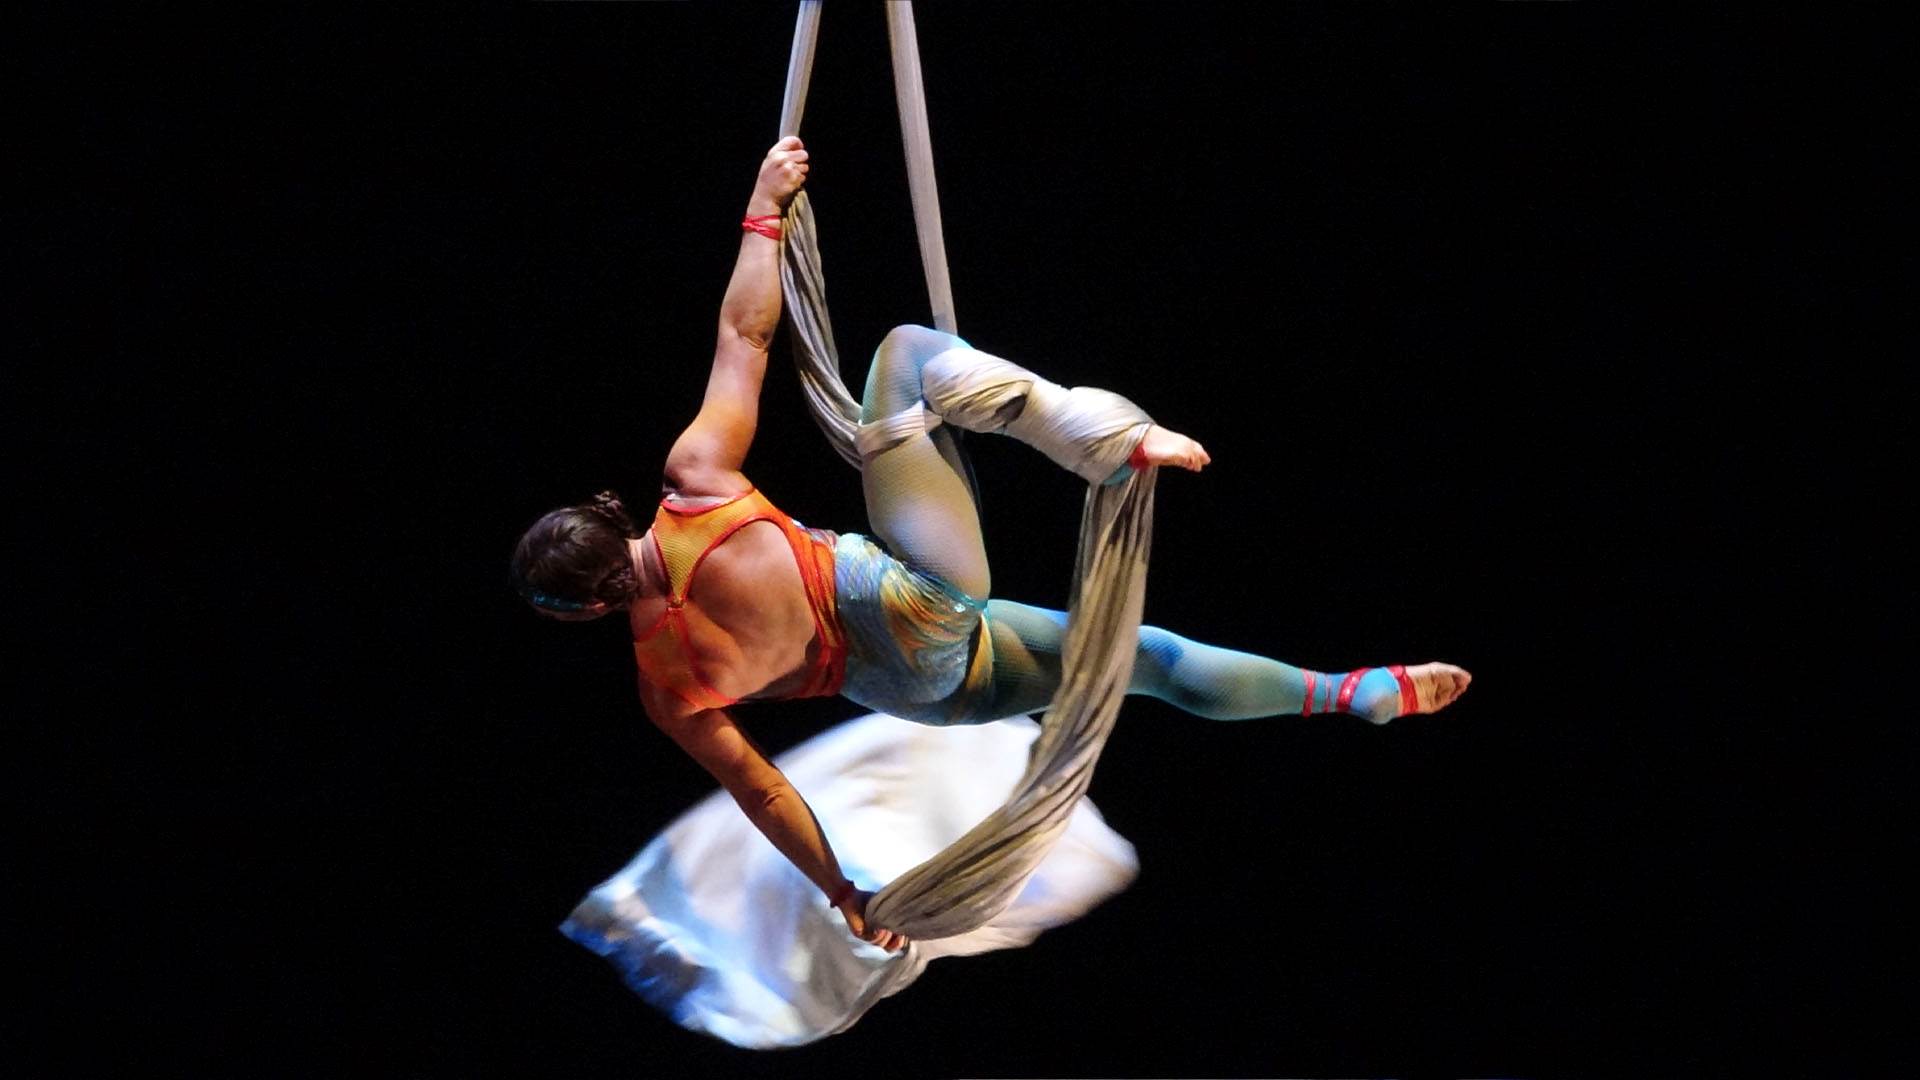 A trapeze artist hanging from a silver cloth. She is wearing an orange and blue leotard.